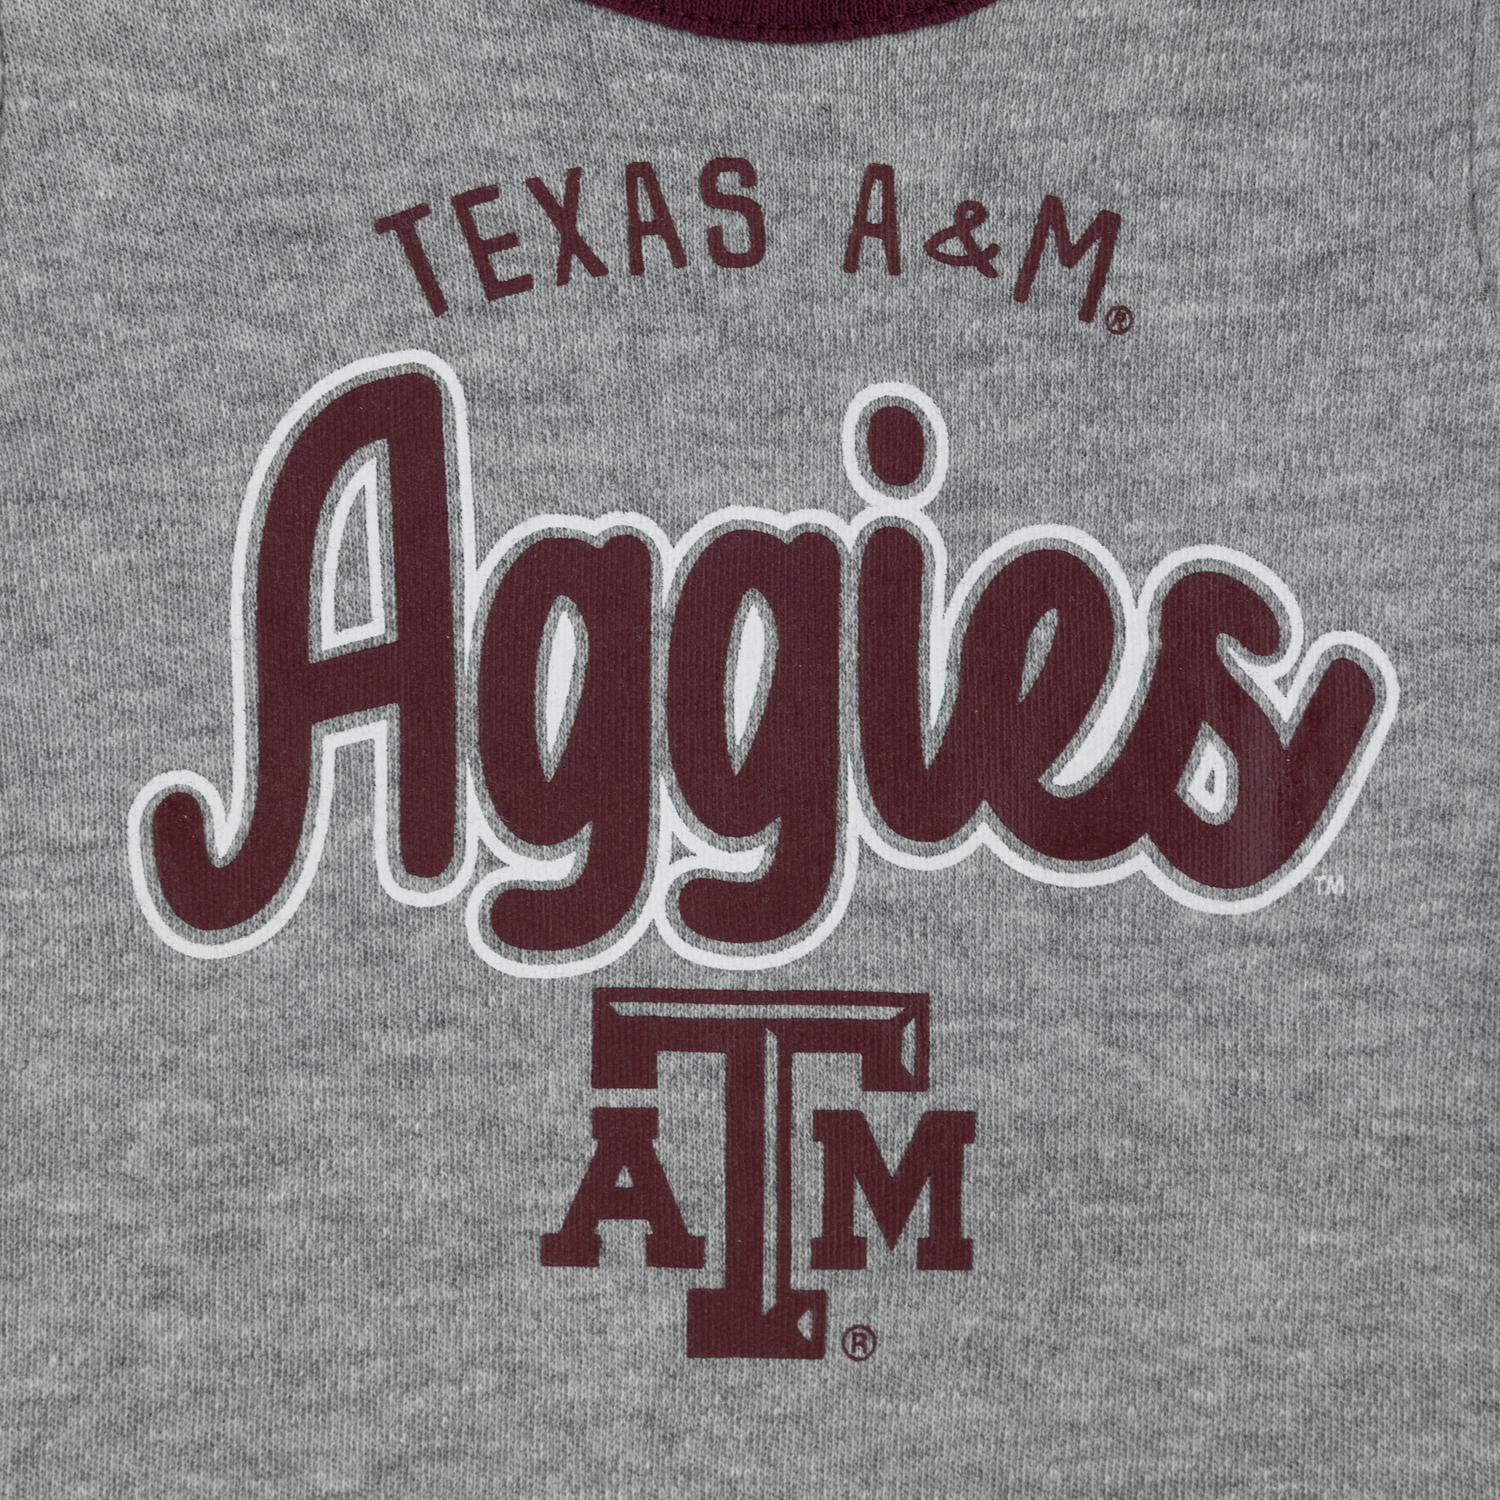 Texas A&M Aggies All Dolled Up Set